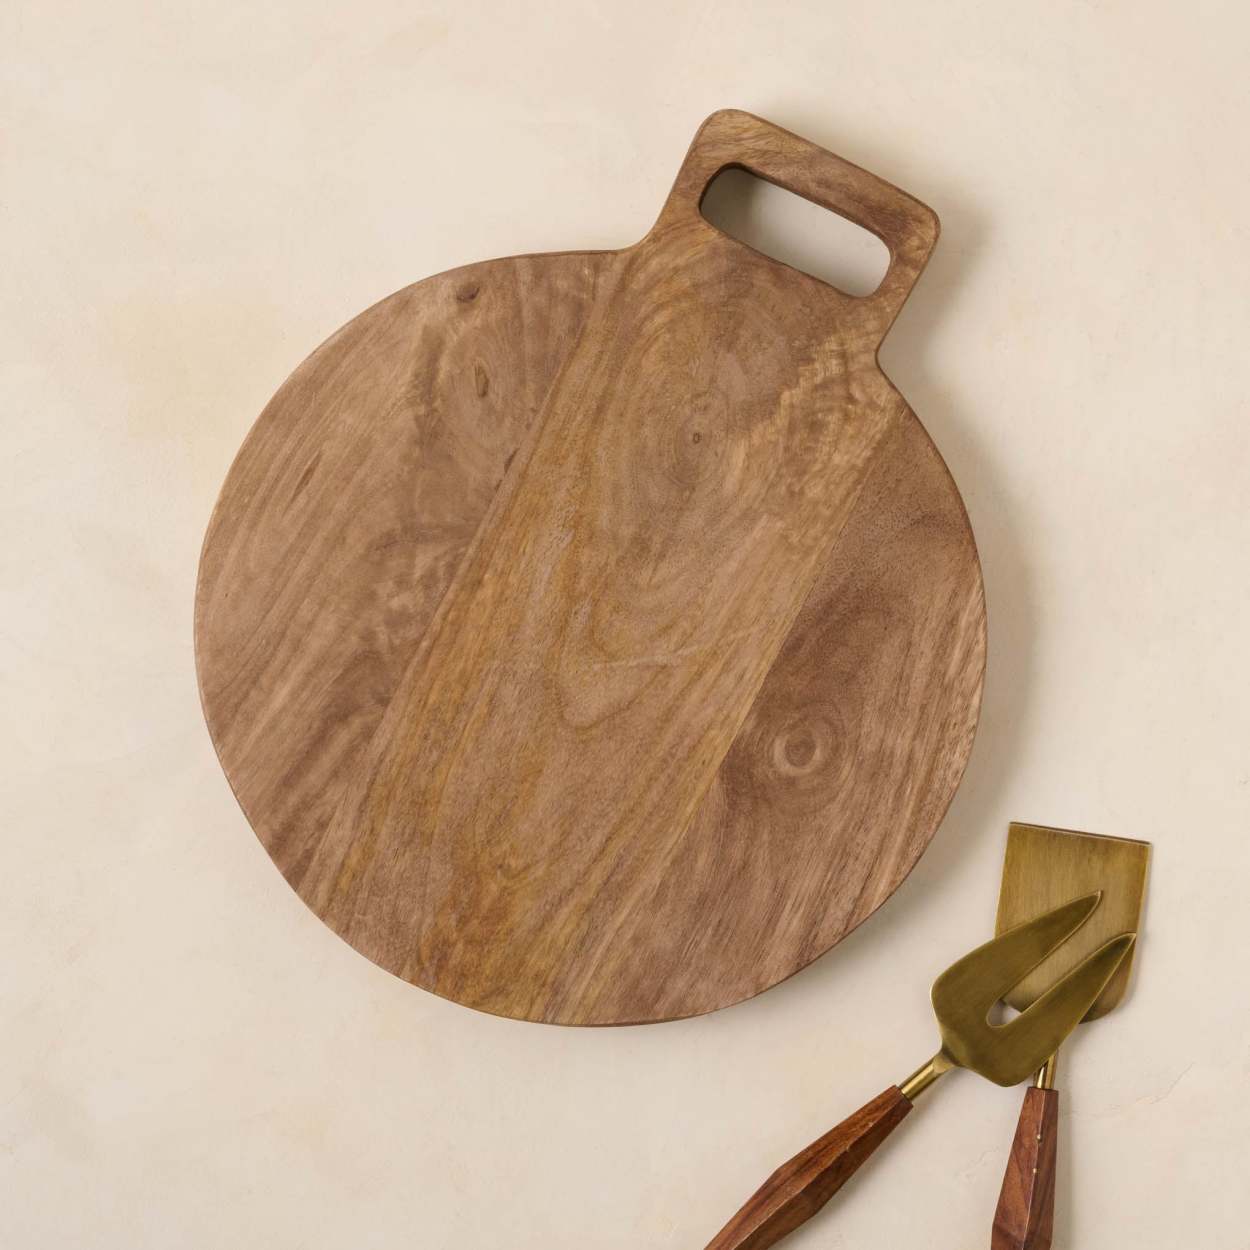 Wooden Cutting Board - Brown/mango wood - Home All